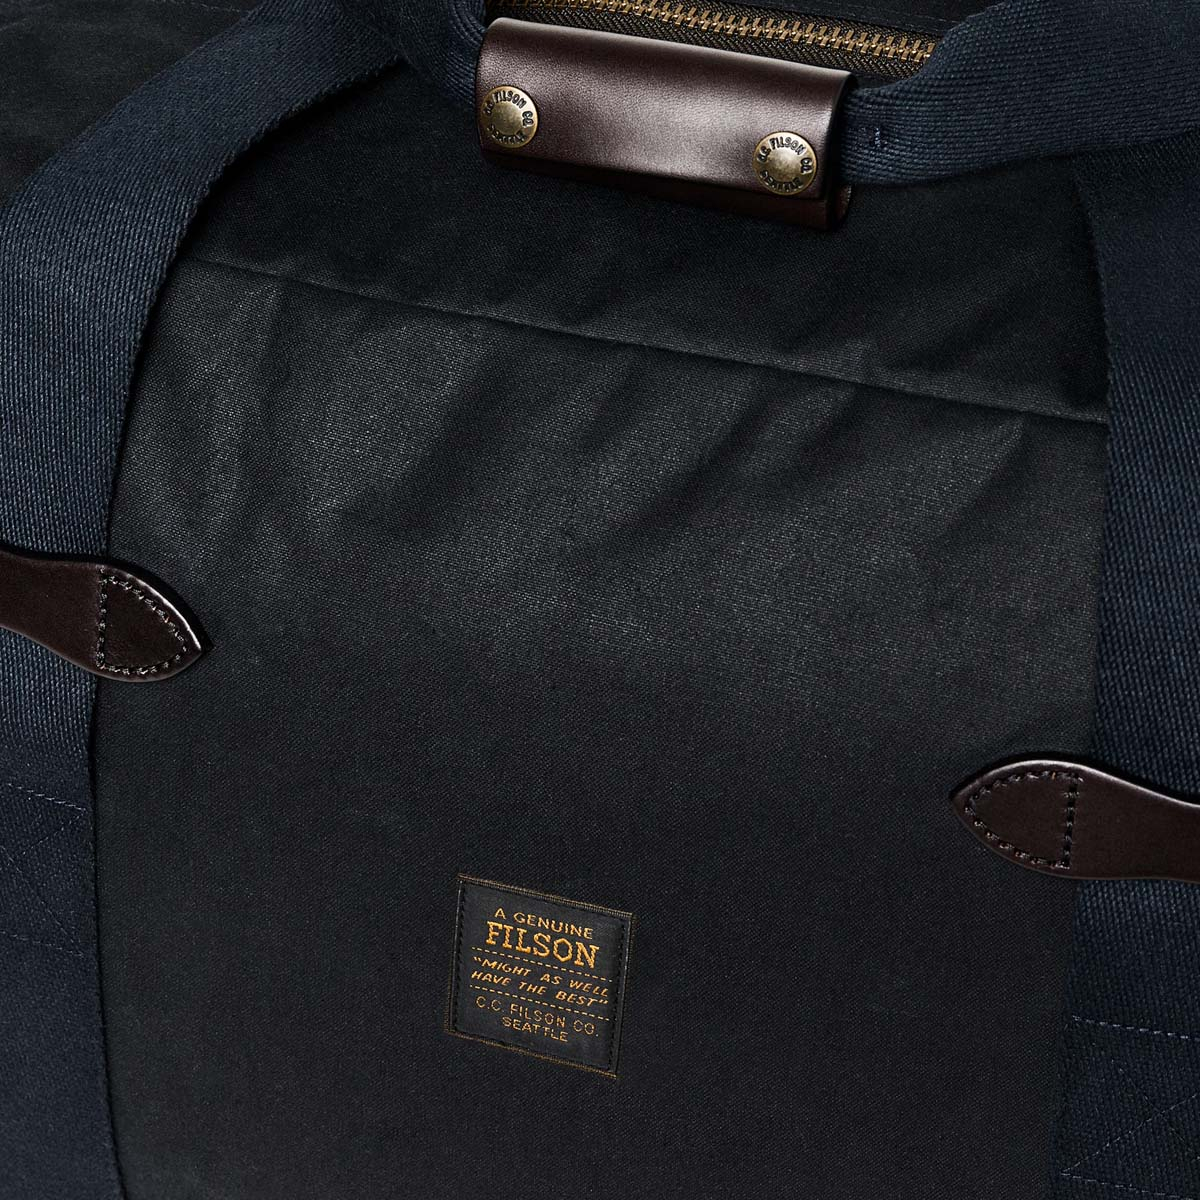 Filson Tin Cloth Medium Duffle Bag Navy, a compact waxed-cotton duffle sized for overnight trips